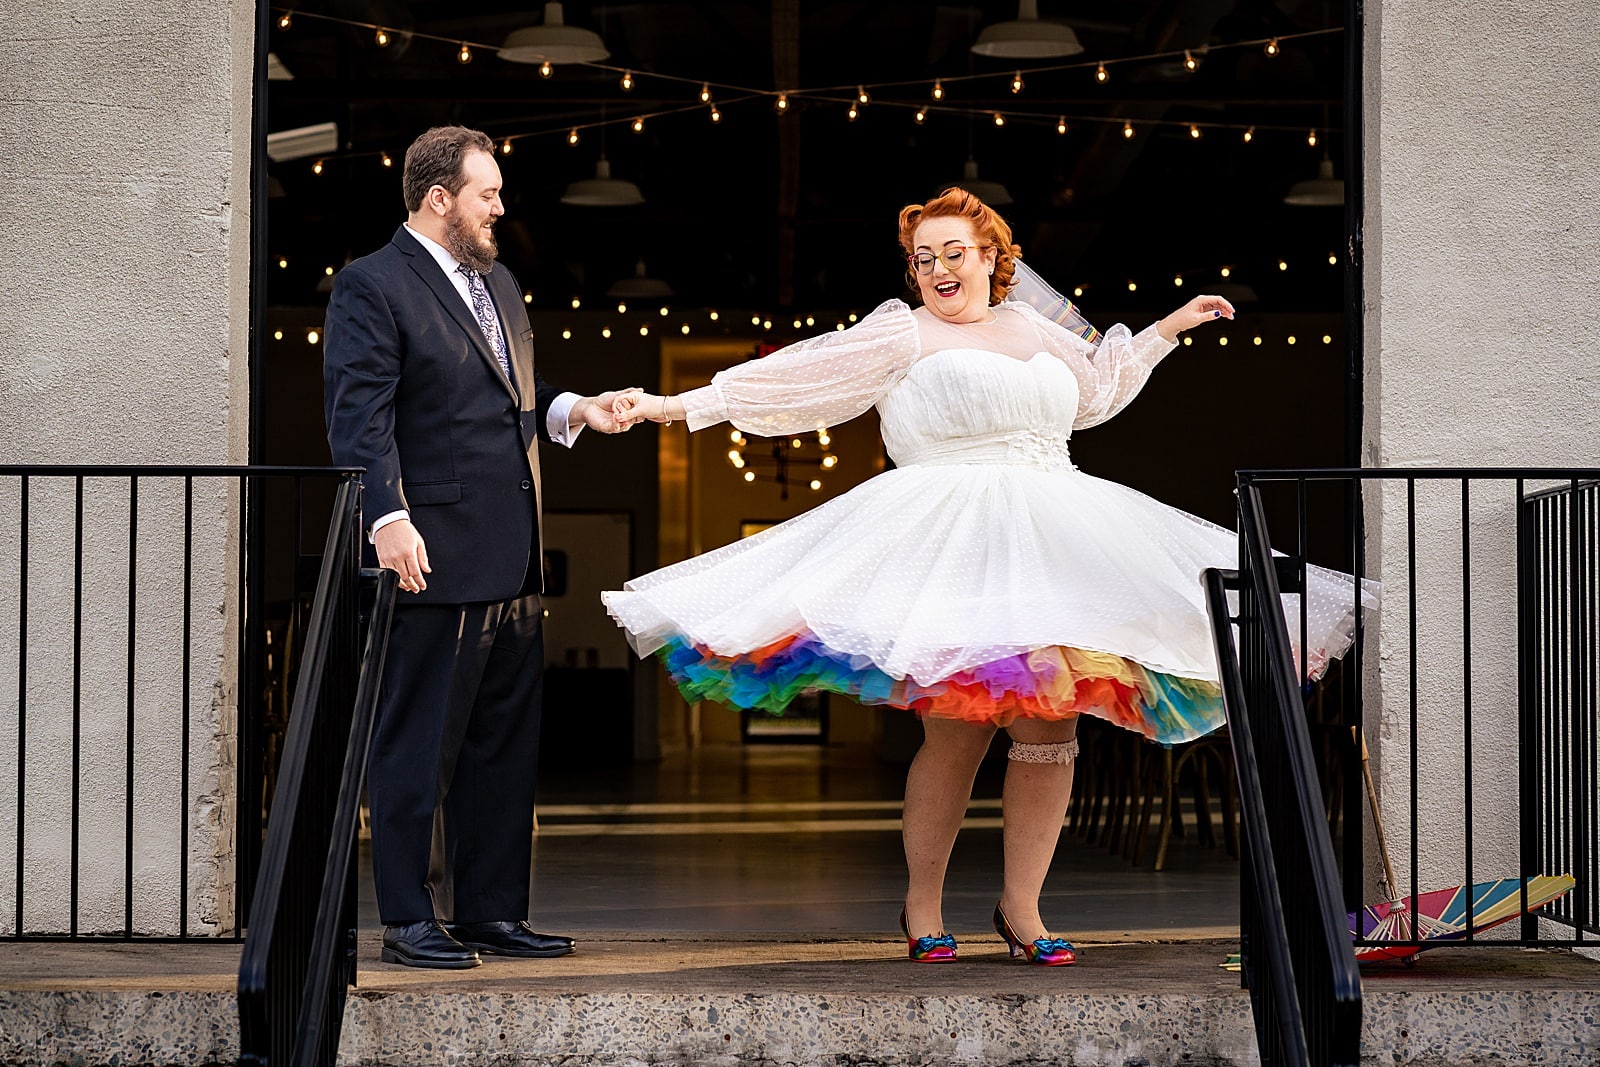 This bride had a rainbow petticoat and a rainbow parasol and a rainbow veil and she's just the best - awesome nerdy Graham Mill wedding